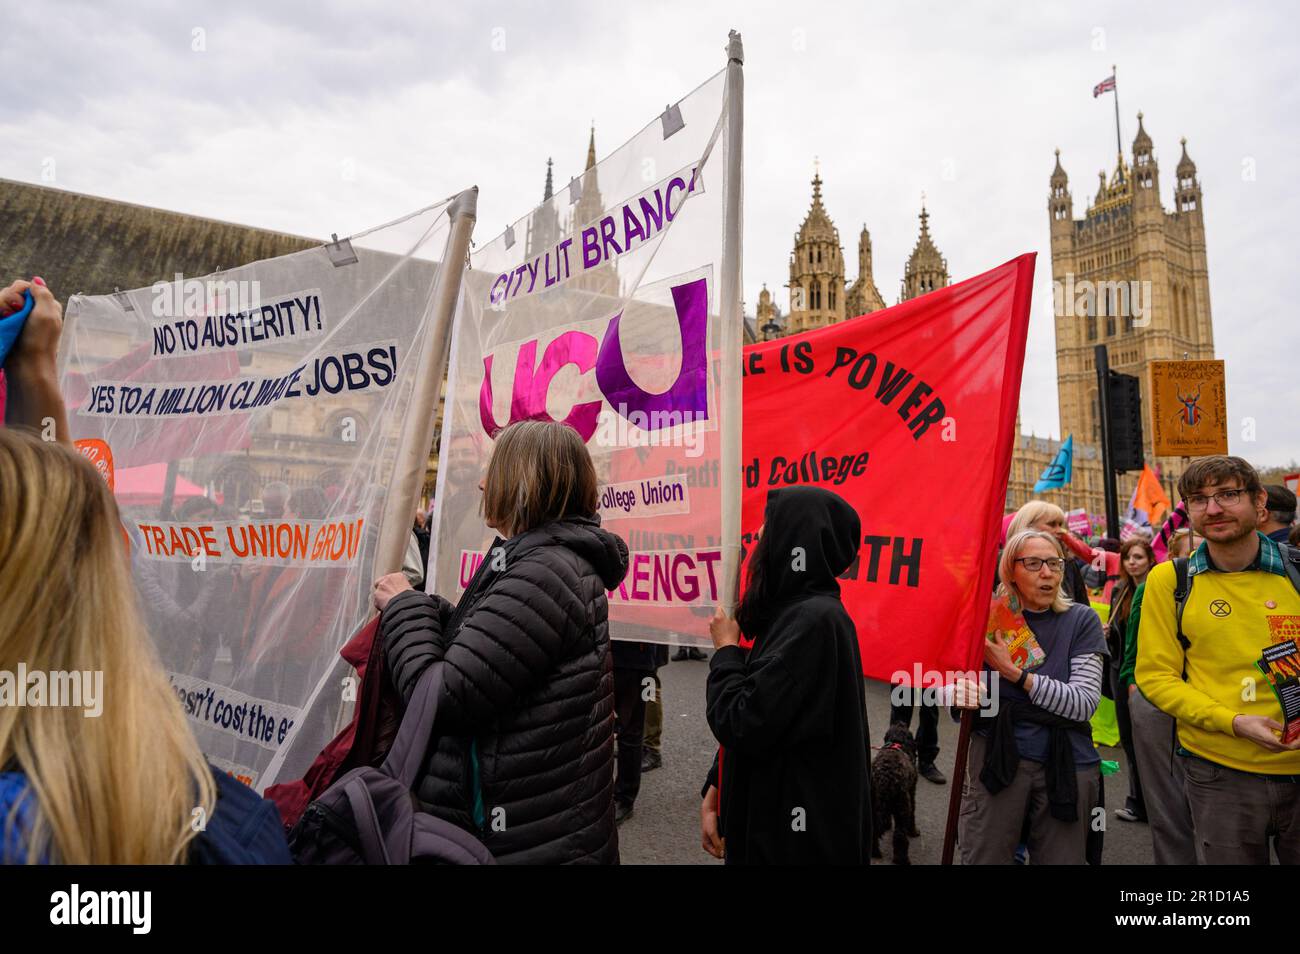 LONDON - April 22, 2023: Witness XR protesters carrying banners near Parliament, advocating for social and environmental justice, in a powerful displa Stock Photo